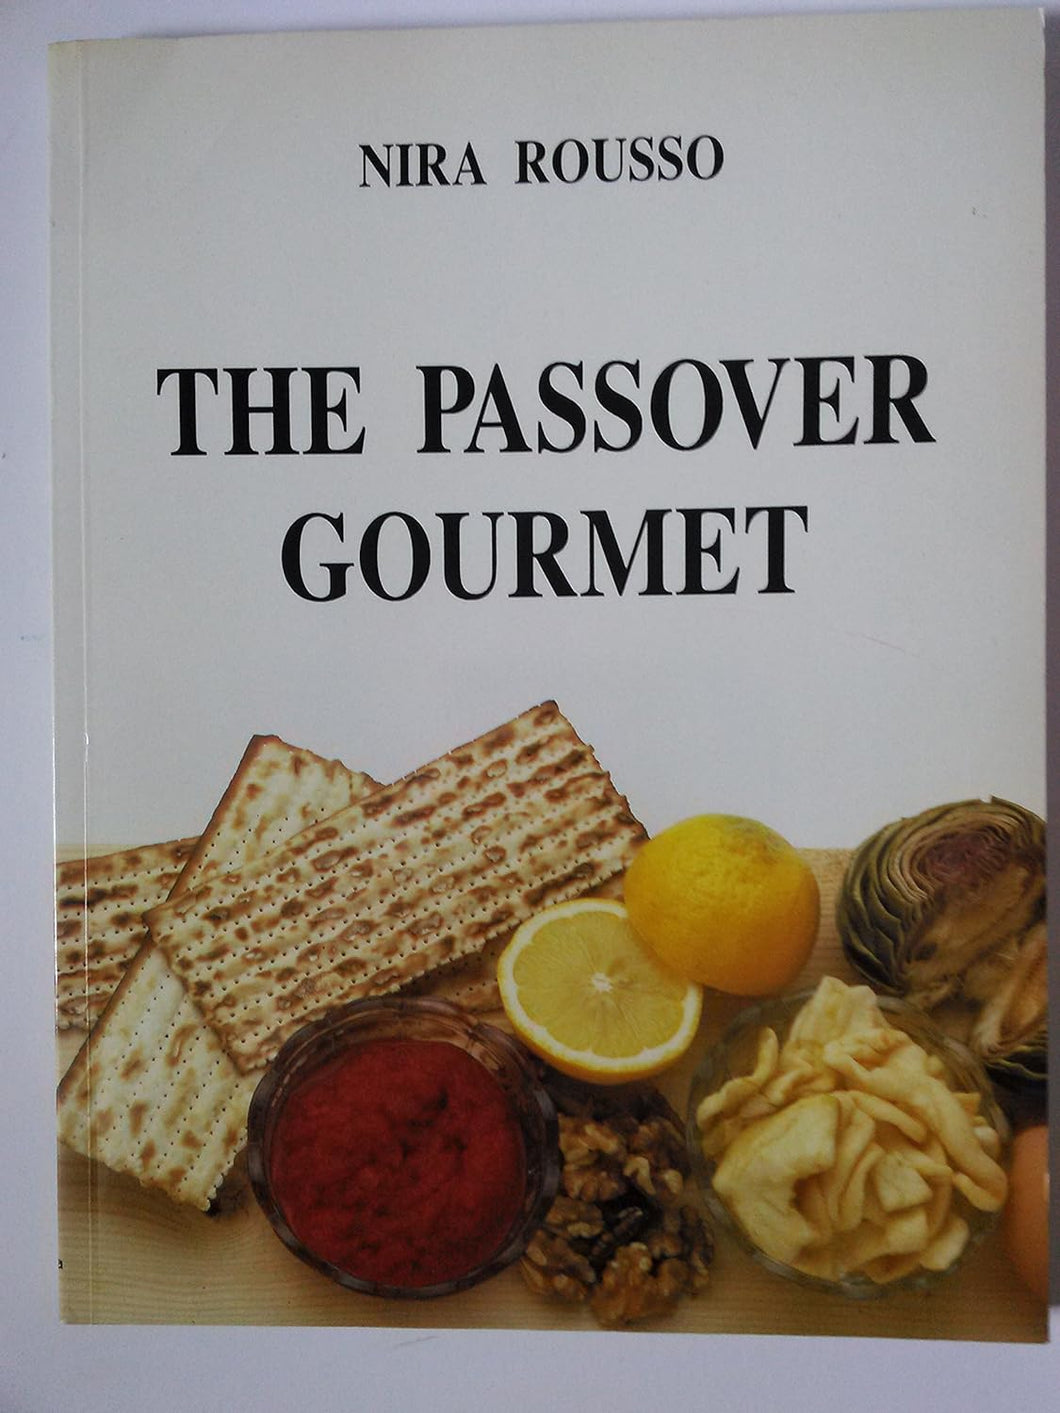 The Passover Gourmet by Nira Rousso